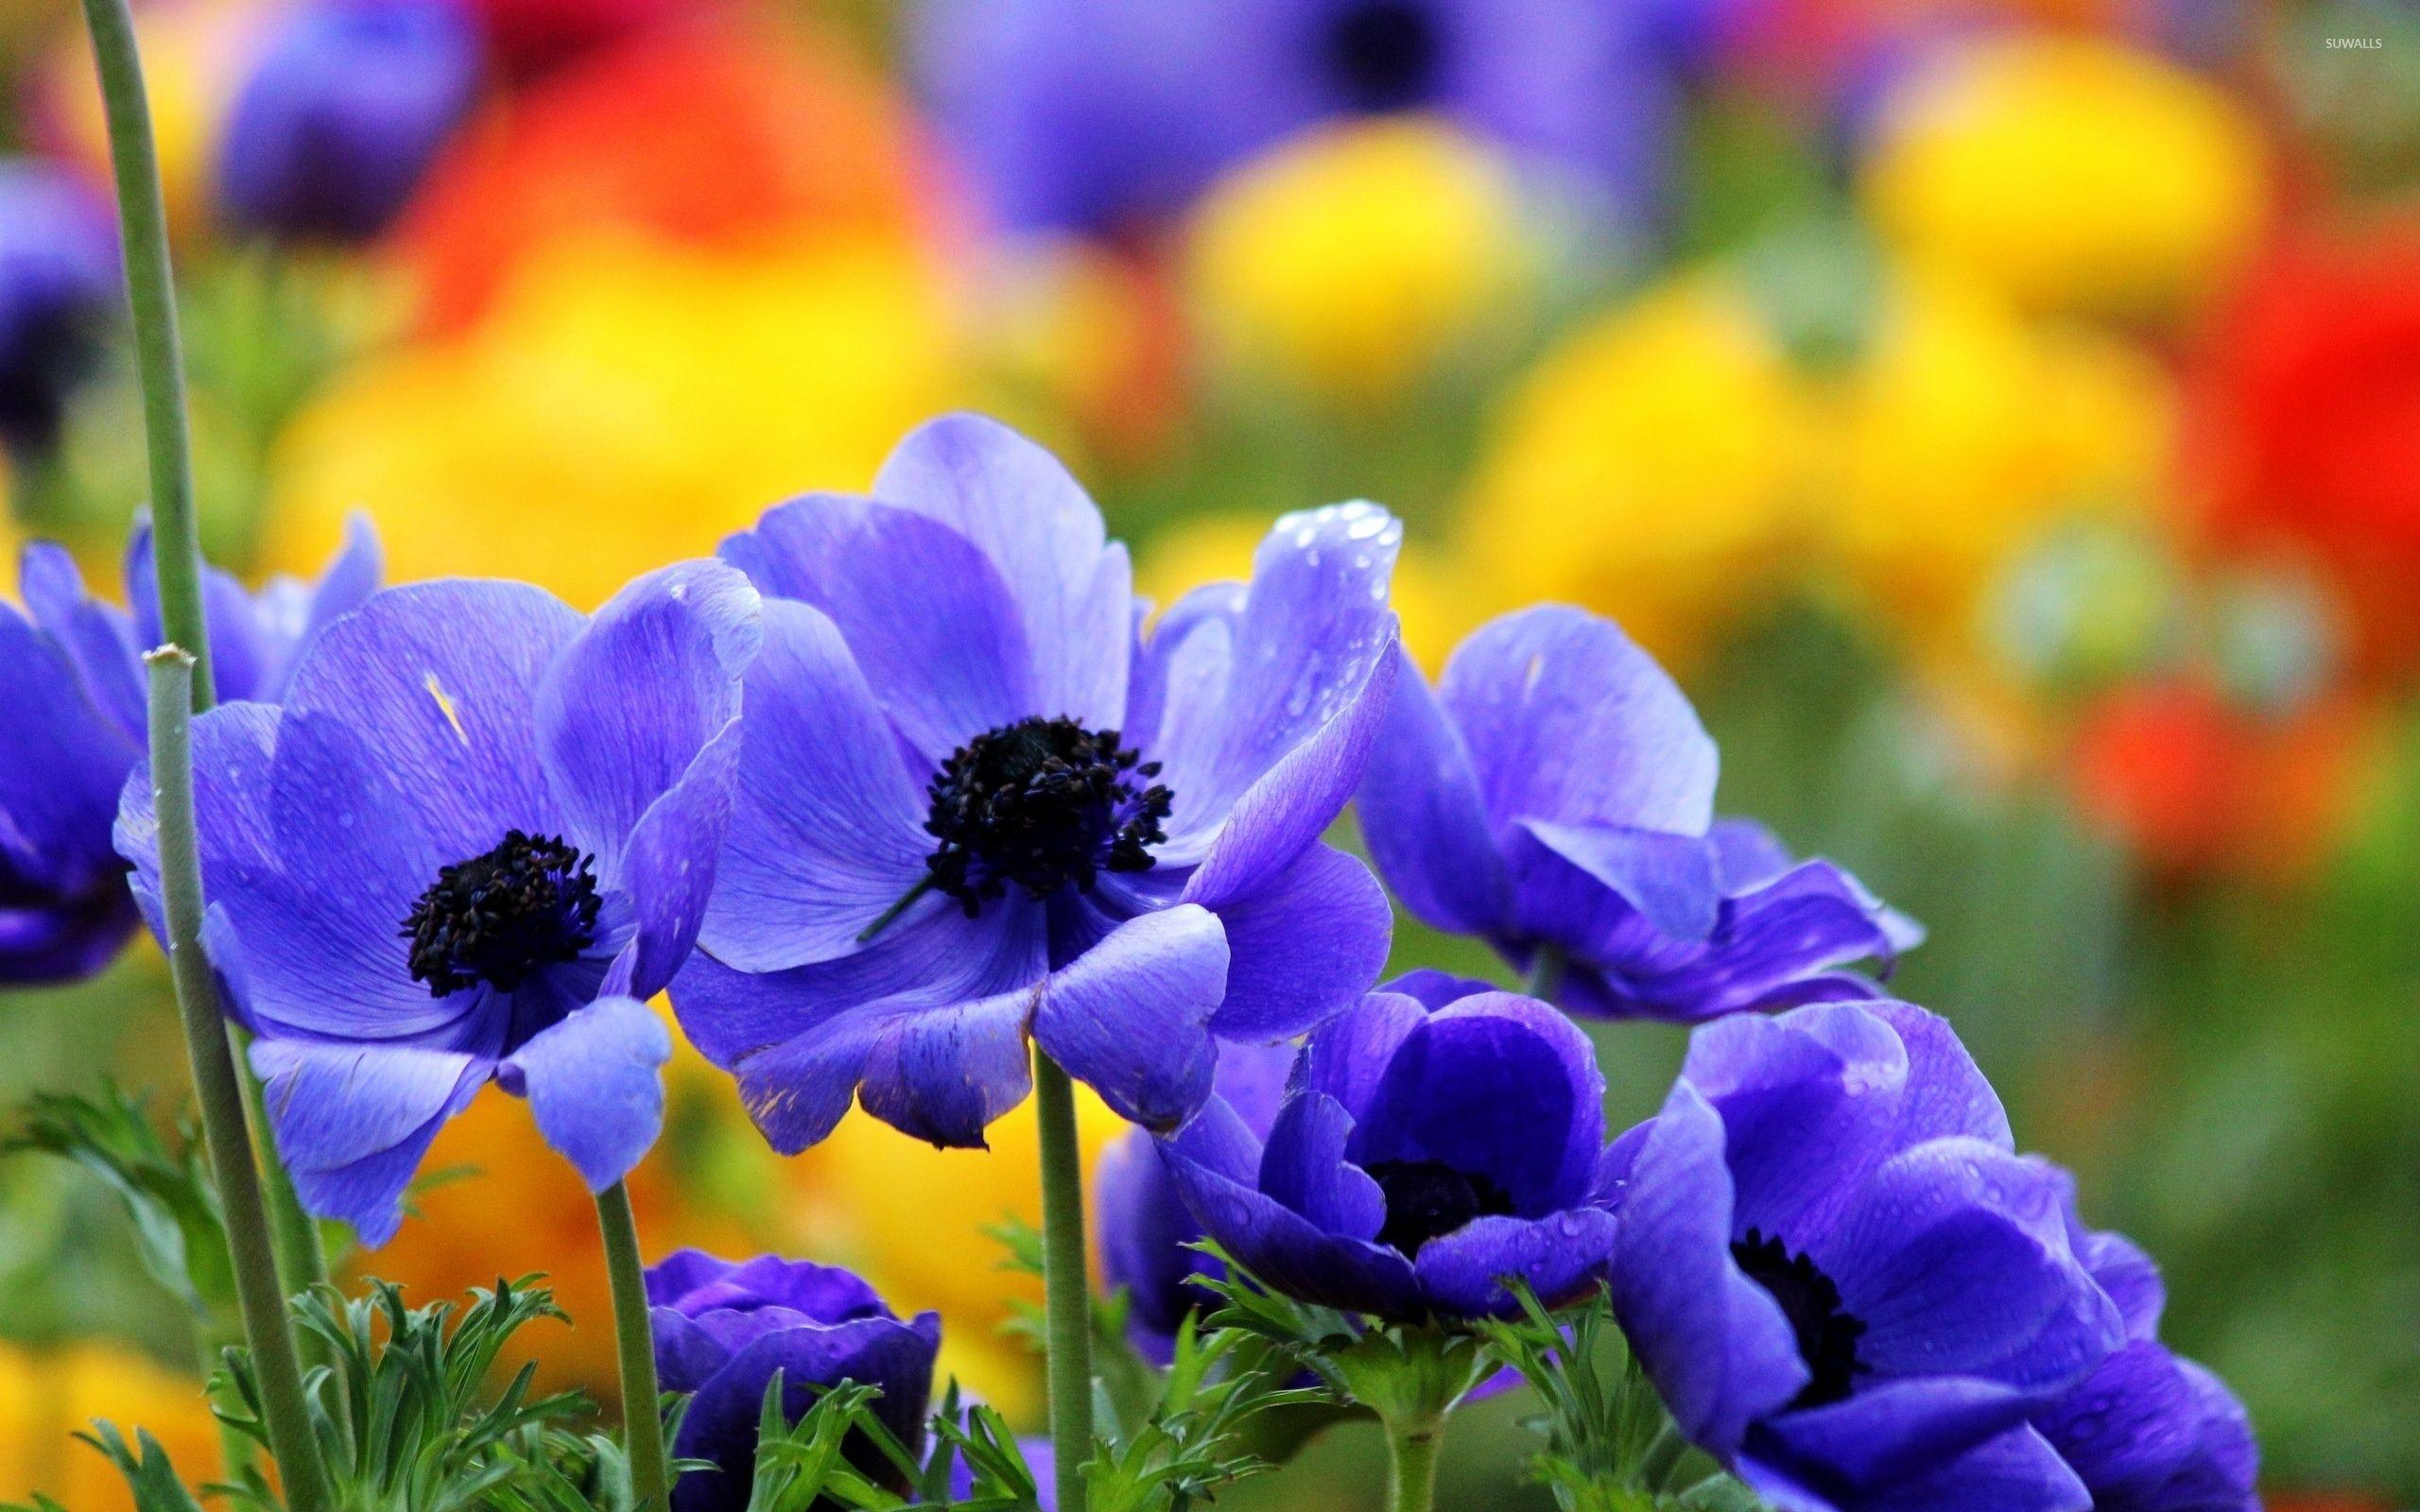 Anemone flower wallpapers